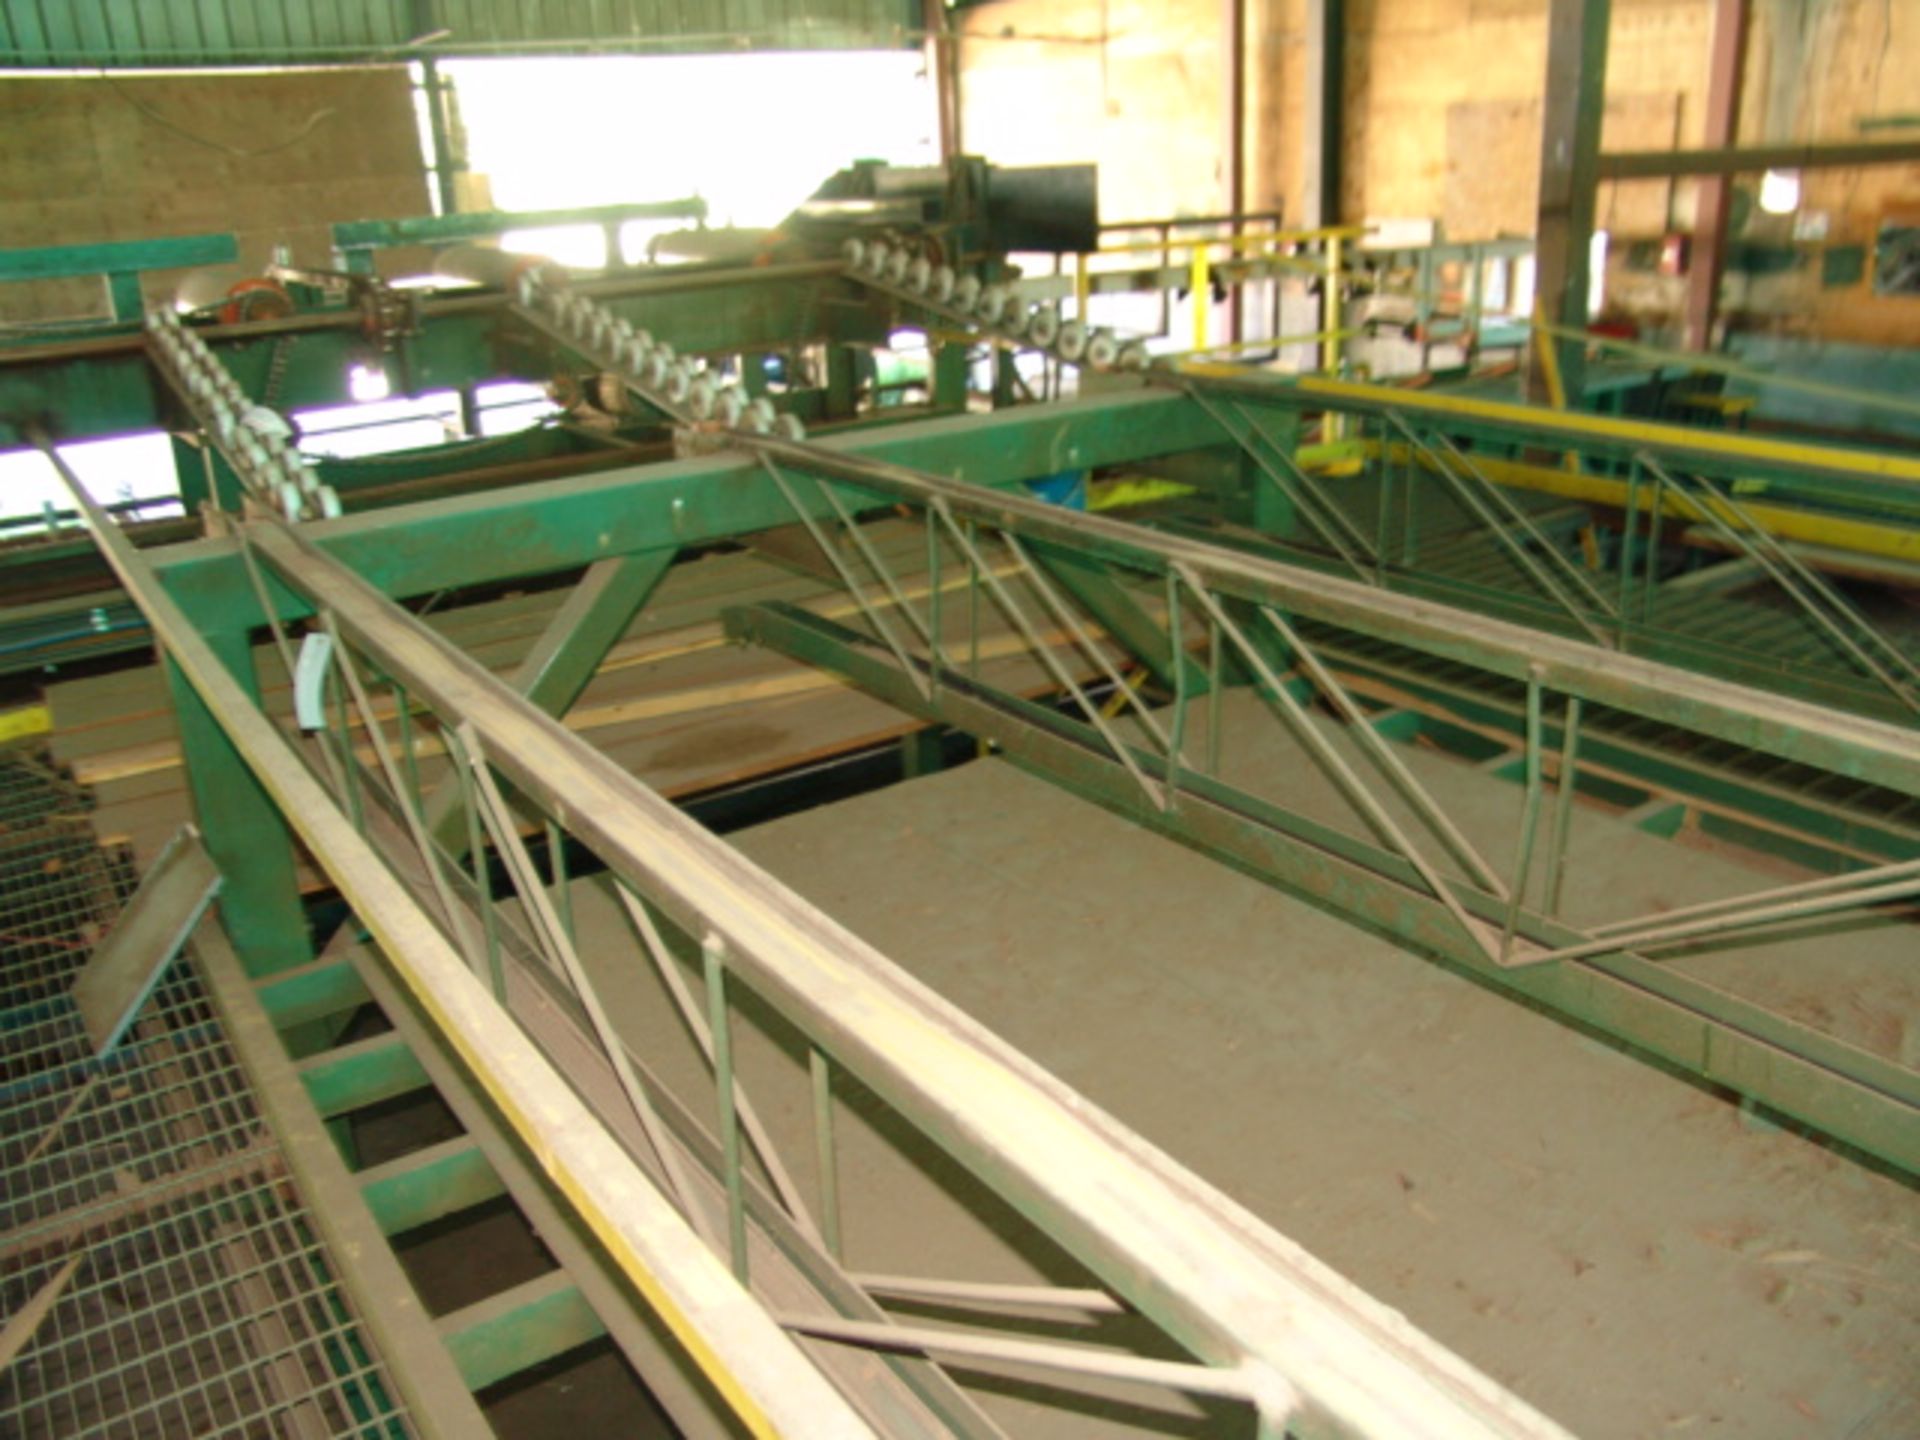 EDGER LINE INFEED: 3 RUN SKATE ROLLS, 6'L, TO 3 STRAND CHAIN TRANSFER, 8' X 50' (CHAIN ON FLOOR);